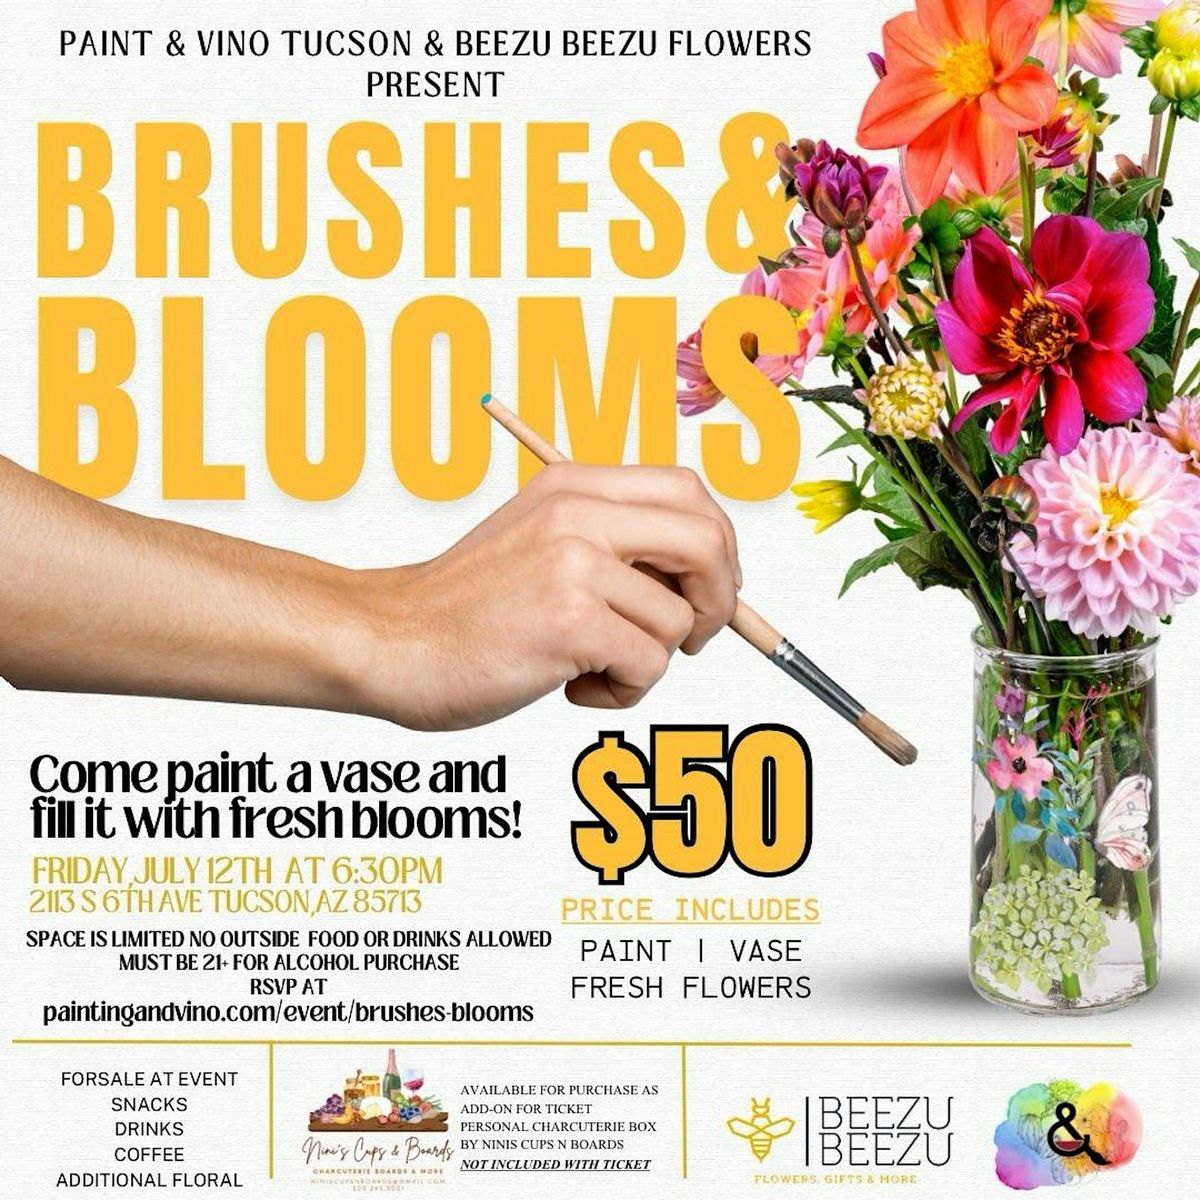 Brushes and Blooms with Beezu Beezu Flowers